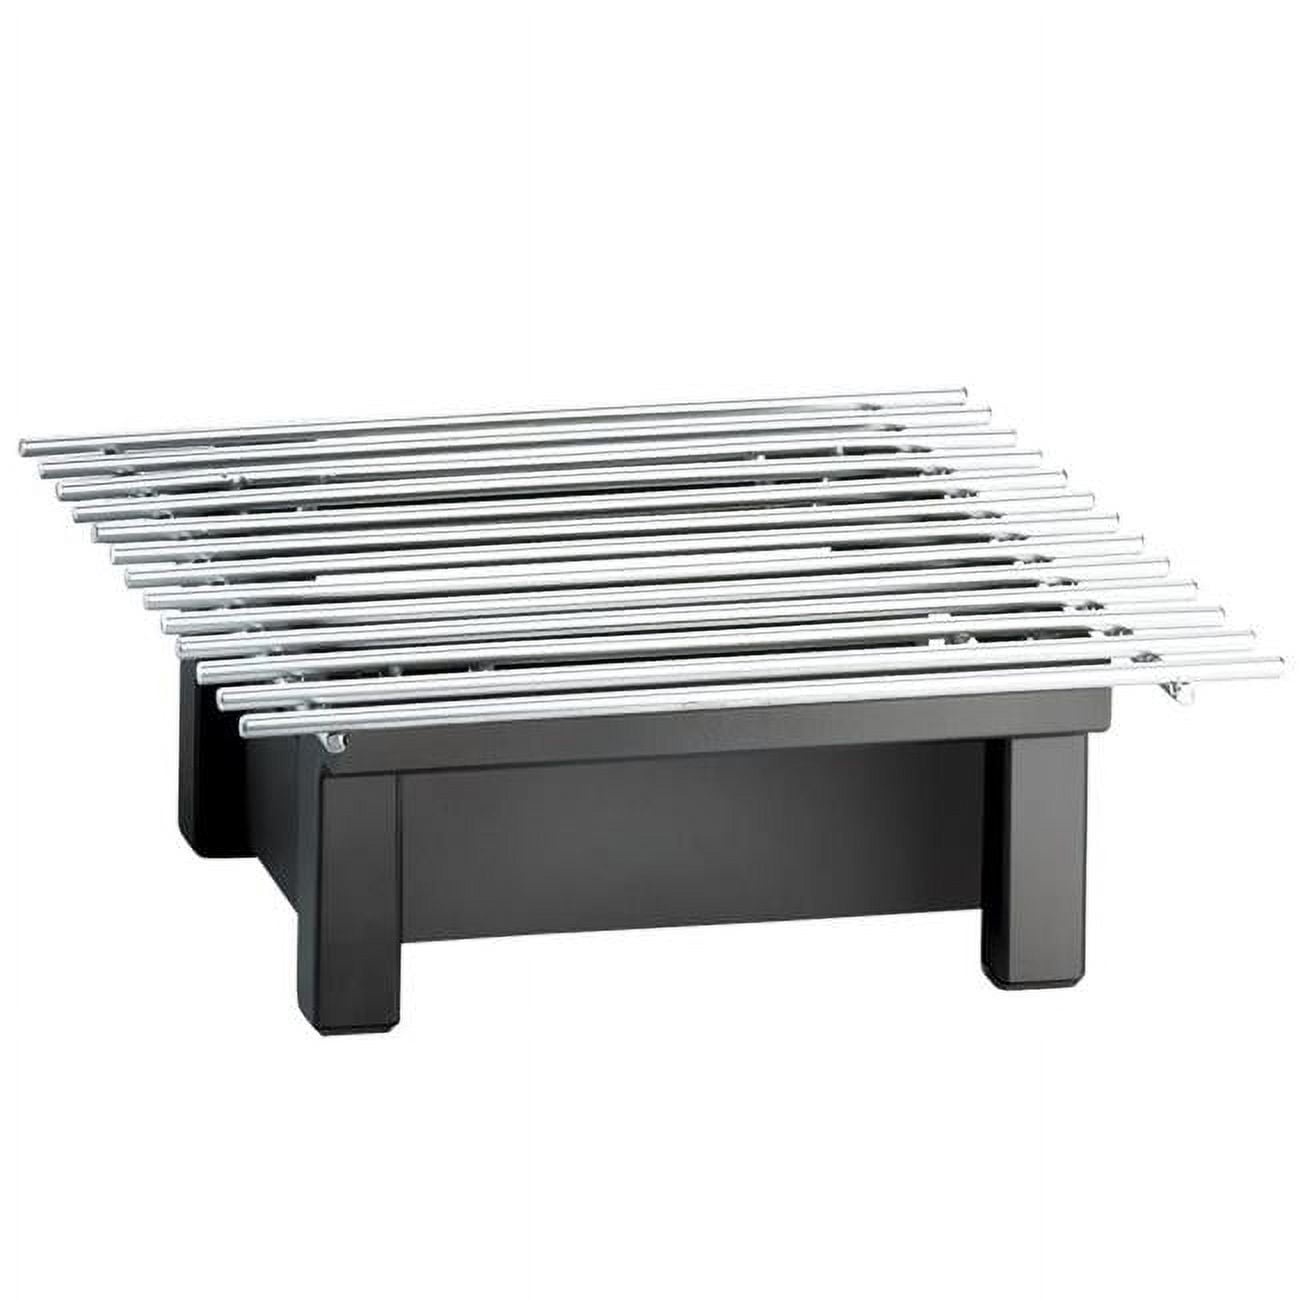 Picture of Cal Mil 1348-12-13 One by One Chafer Griddle, Black - 12 x 12 x 4 in.